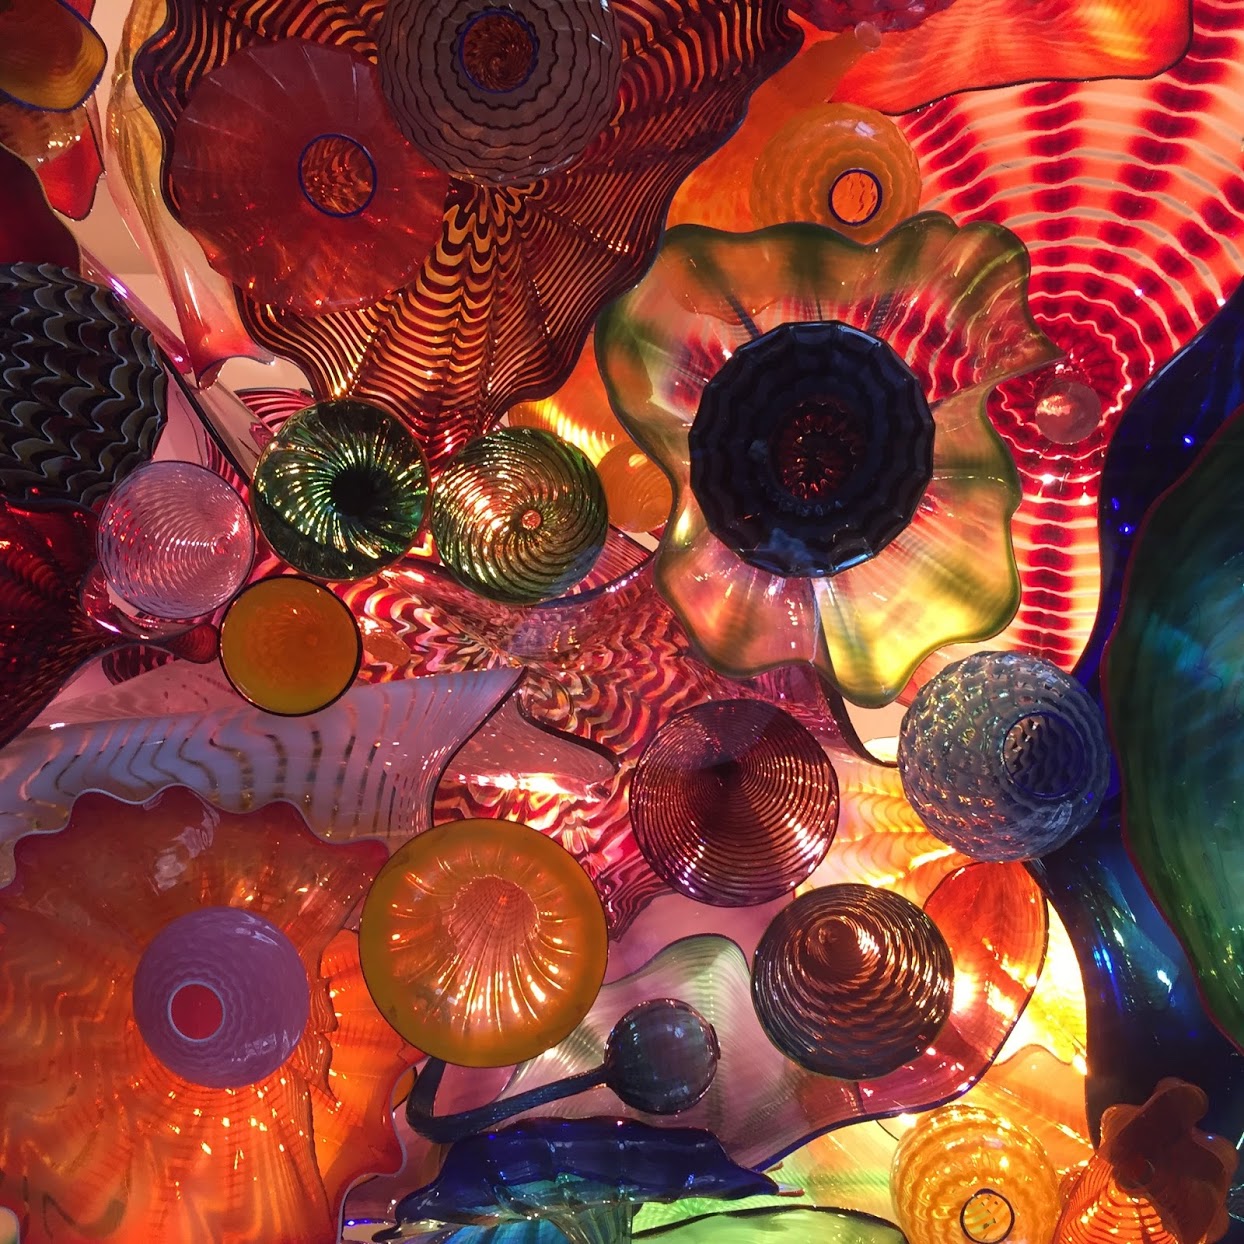 Chihuly glass pieces